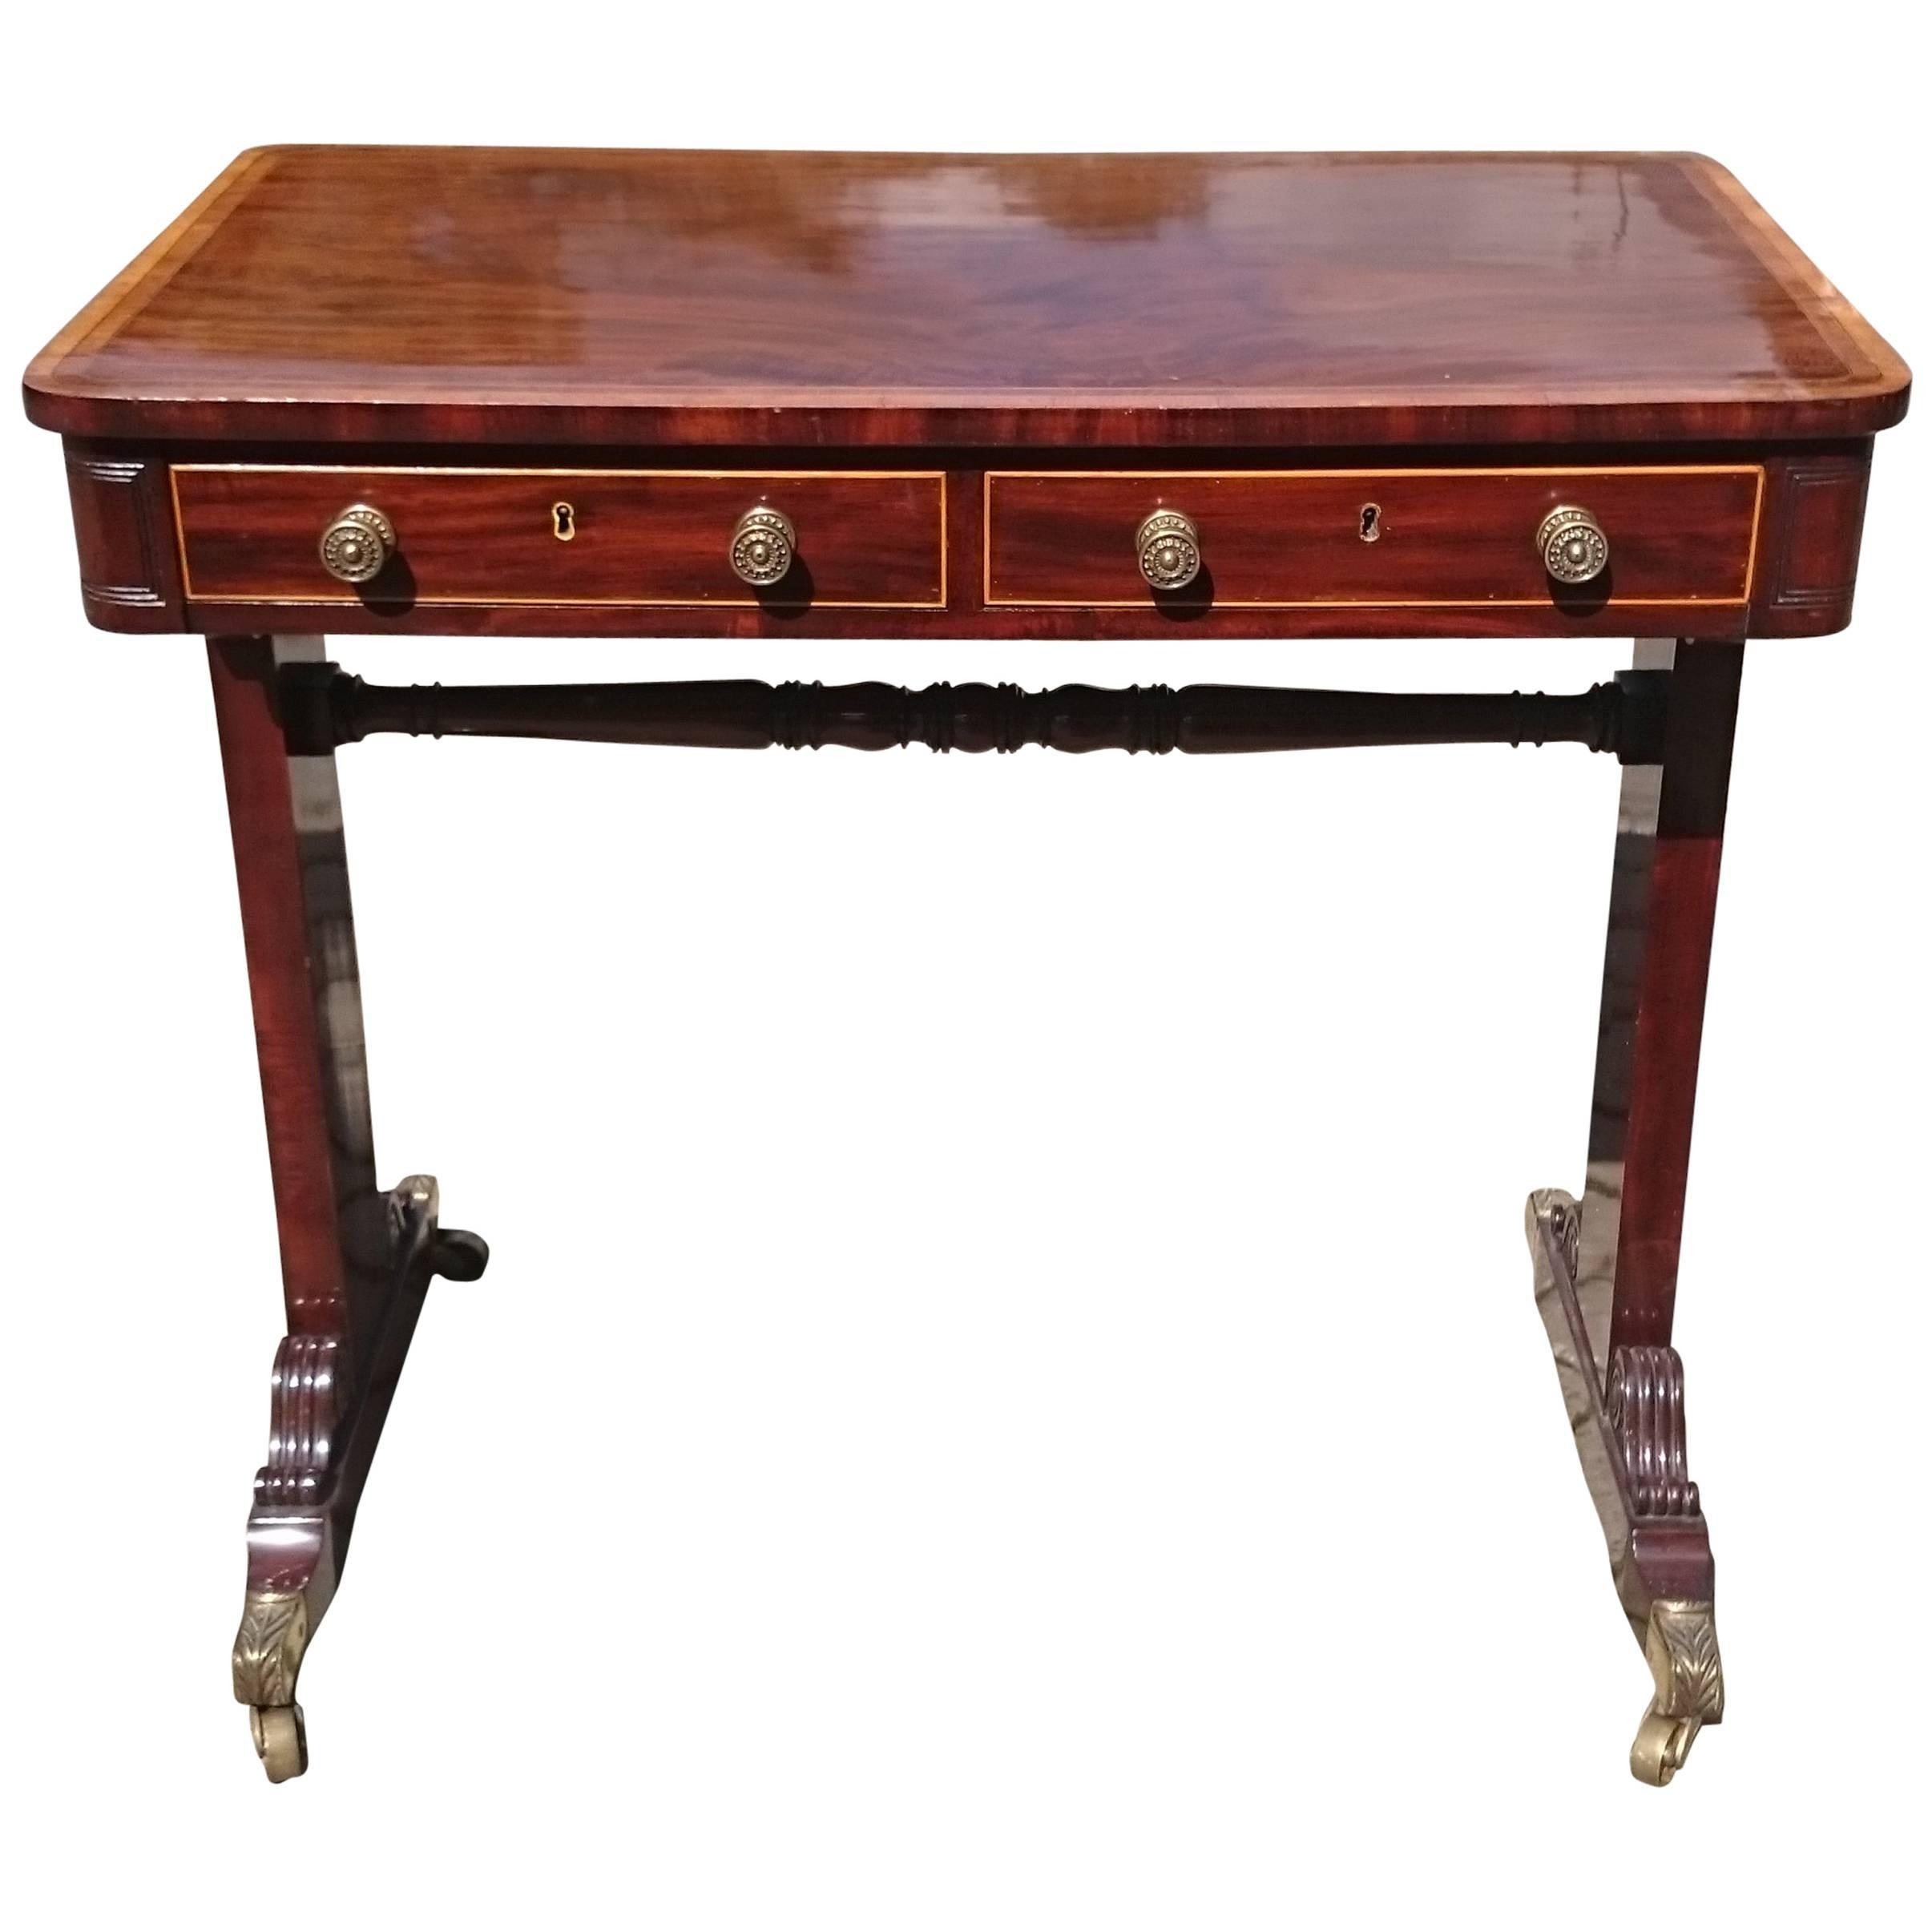 Very Fine Regency Antique Wine Table or Centre Table or Writing Table